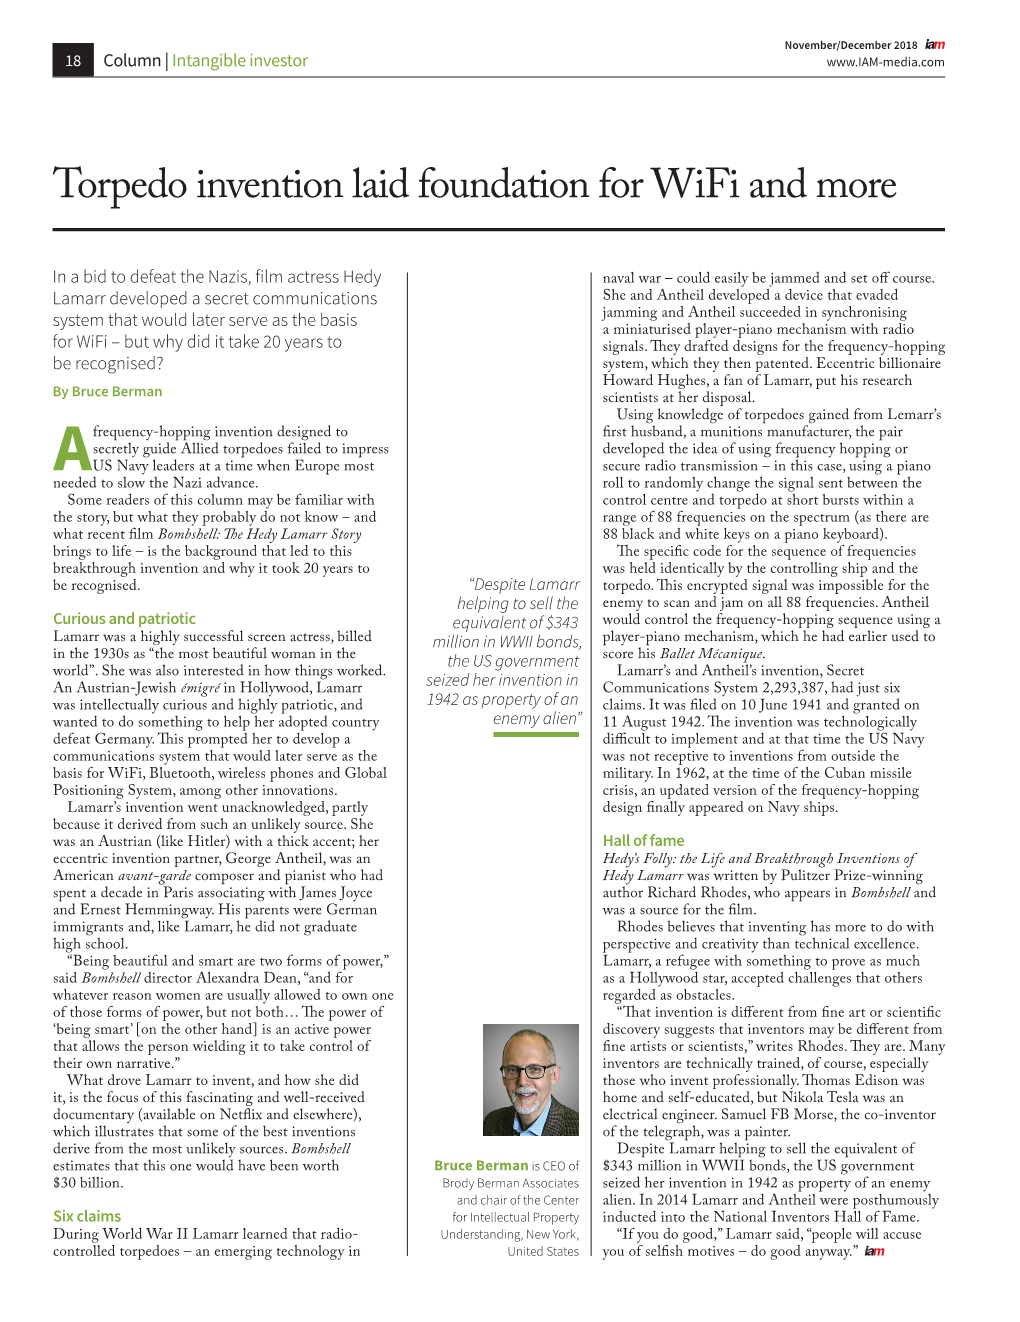 Torpedo Invention Laid Foundation for Wifi and More